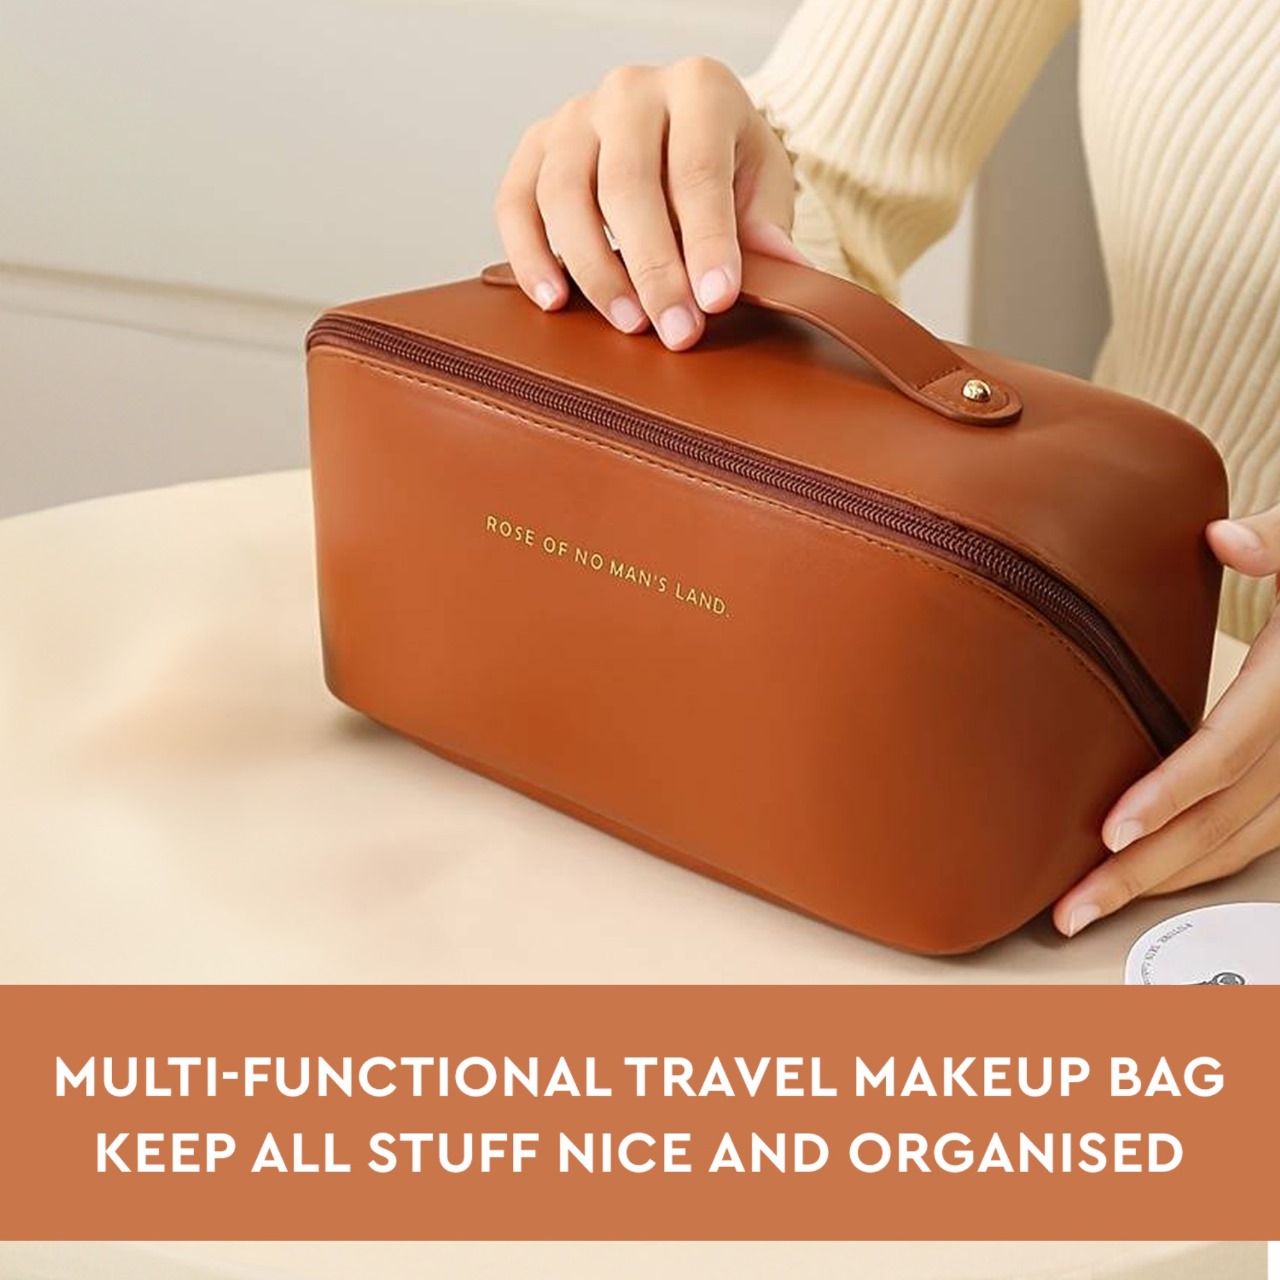 GUBB Multifunctional Travel Makeup Bag | Large Capacity Portable Leather Makeup Bag with Convinient & Durable Handle | Cosmetics Storage Bag with Waterproof PU Leather Fabric - Brown